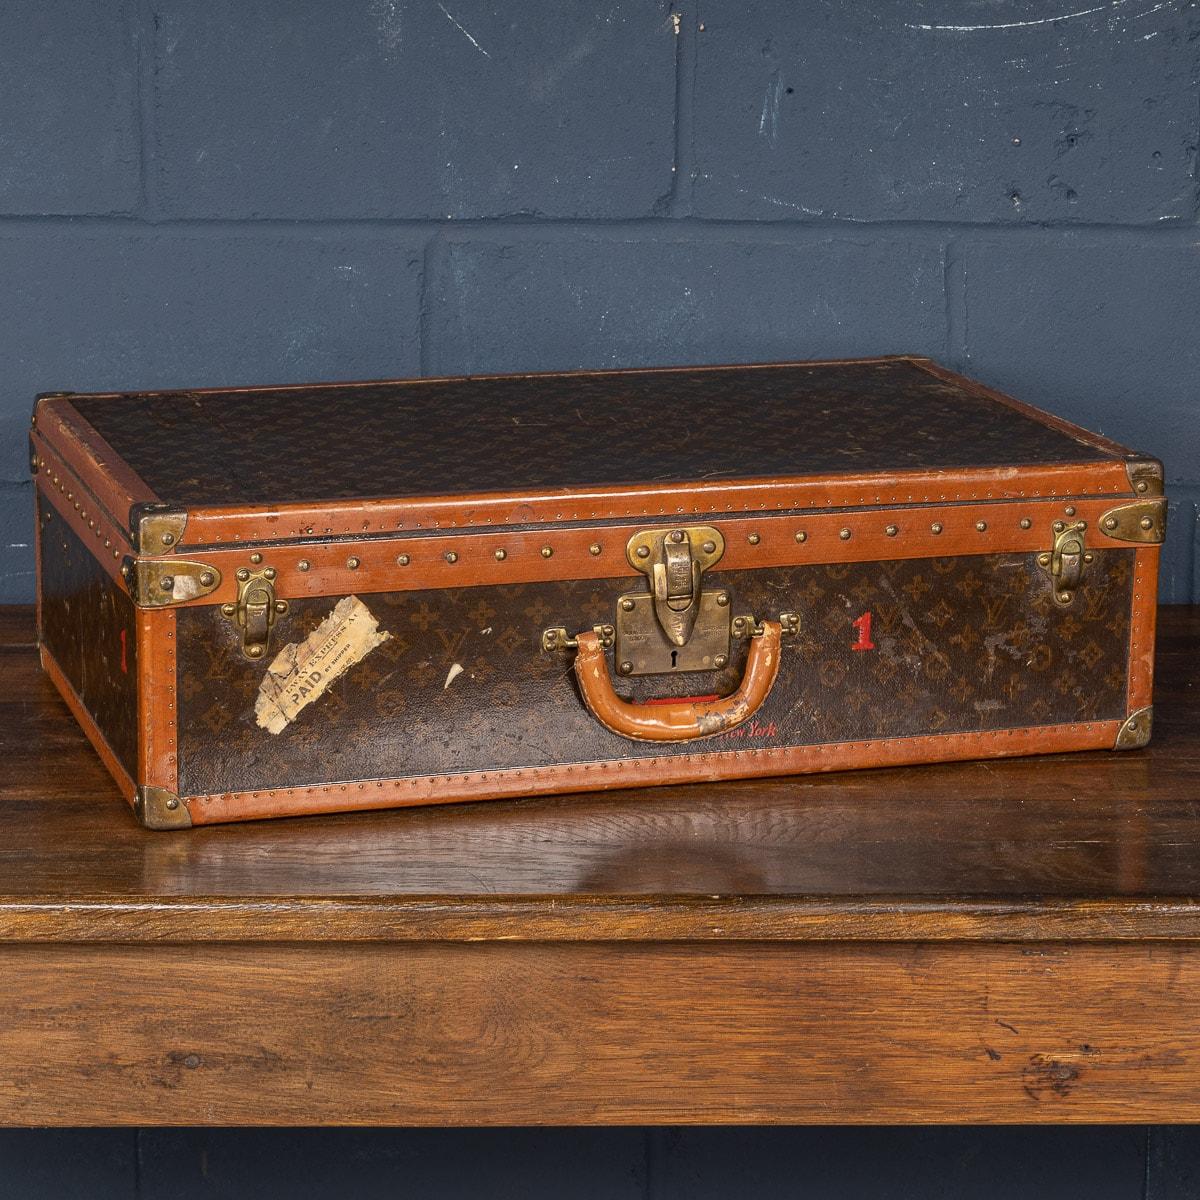 A charming Louis Vuitton hard-sided case, mid 20th century, the exterior finished in the famous monogram canvas with brass fittings. A great piece for use today or as an item for the home.

CONDITION
In overall good vintage condition. Please